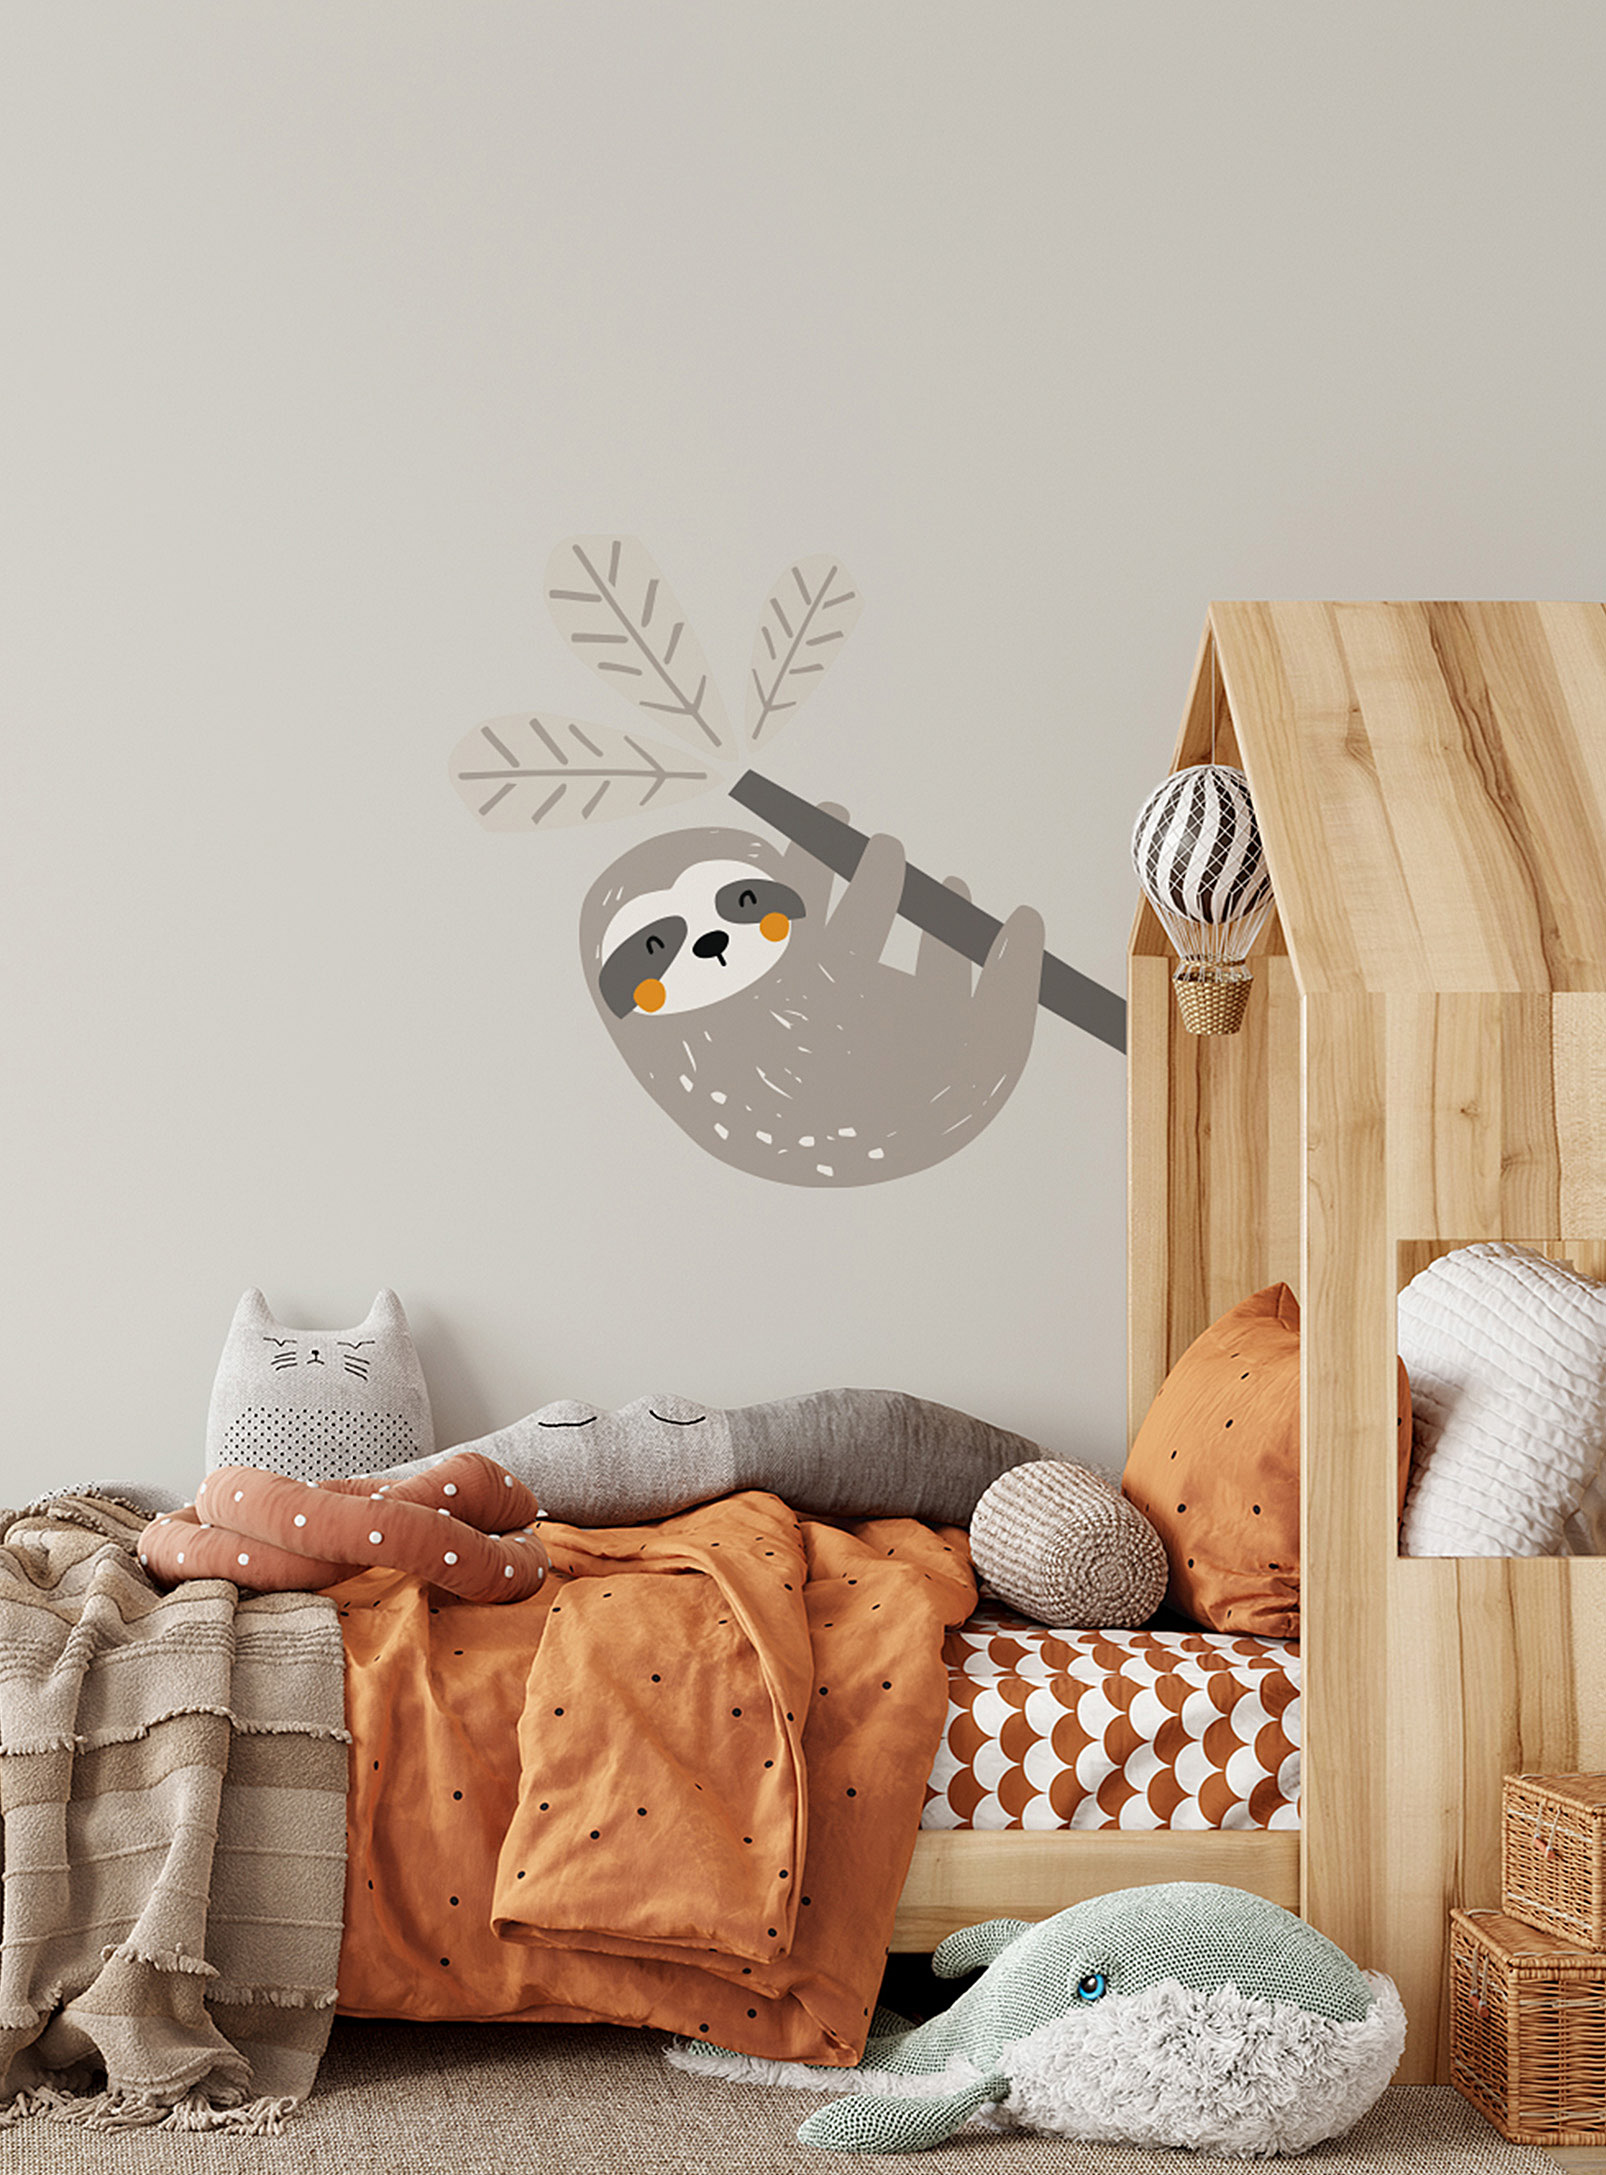 Meraki Vie De Pacha Wall Decals In Collaboration With Artist Marie-france Auger In Grey